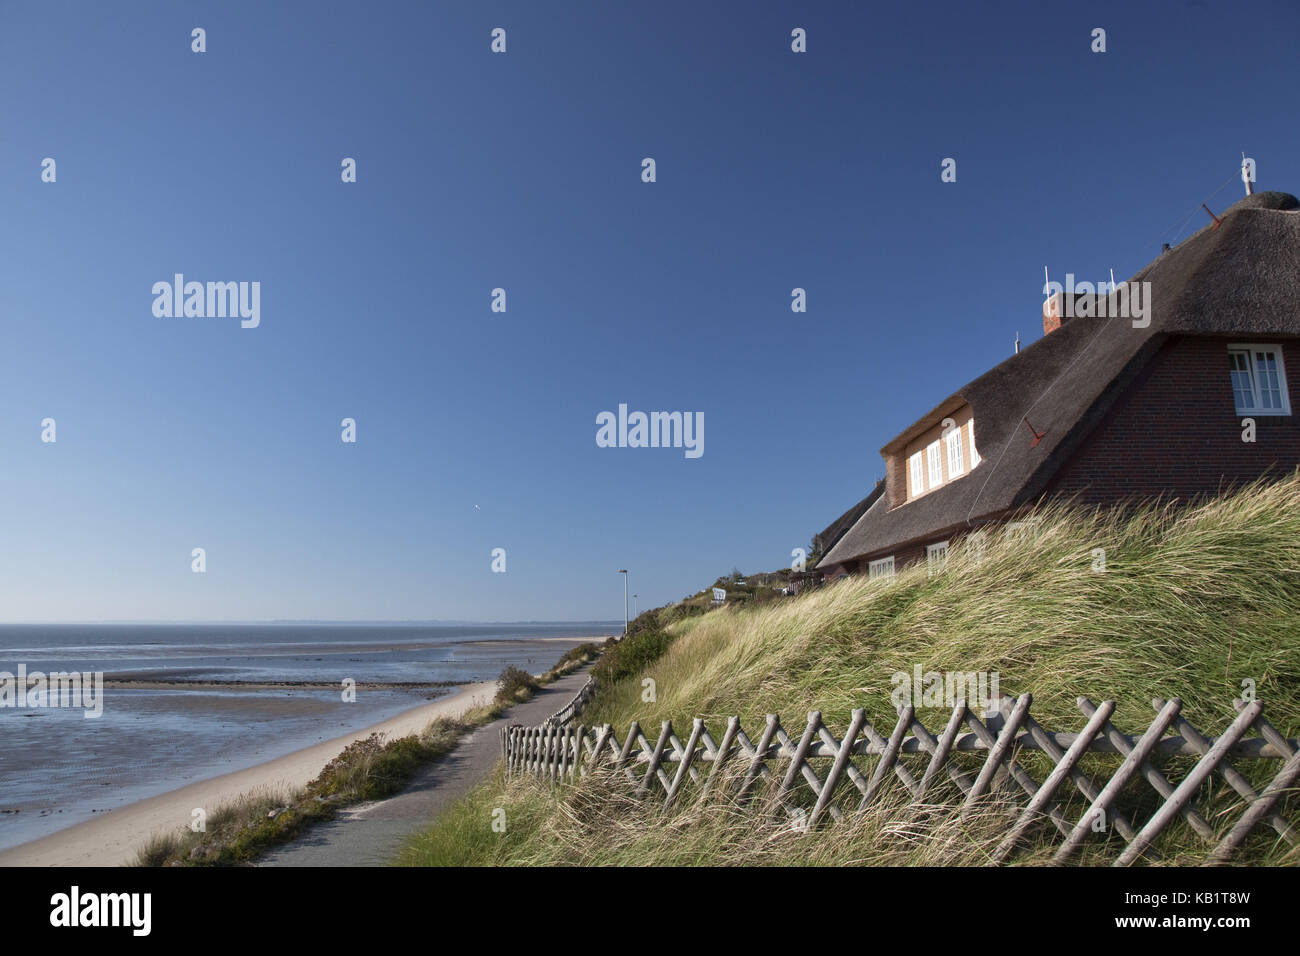 Thatched-roof houses by the North Sea with low tide, List, Sylt island, Schleswig - Holstein, Germany, Stock Photo